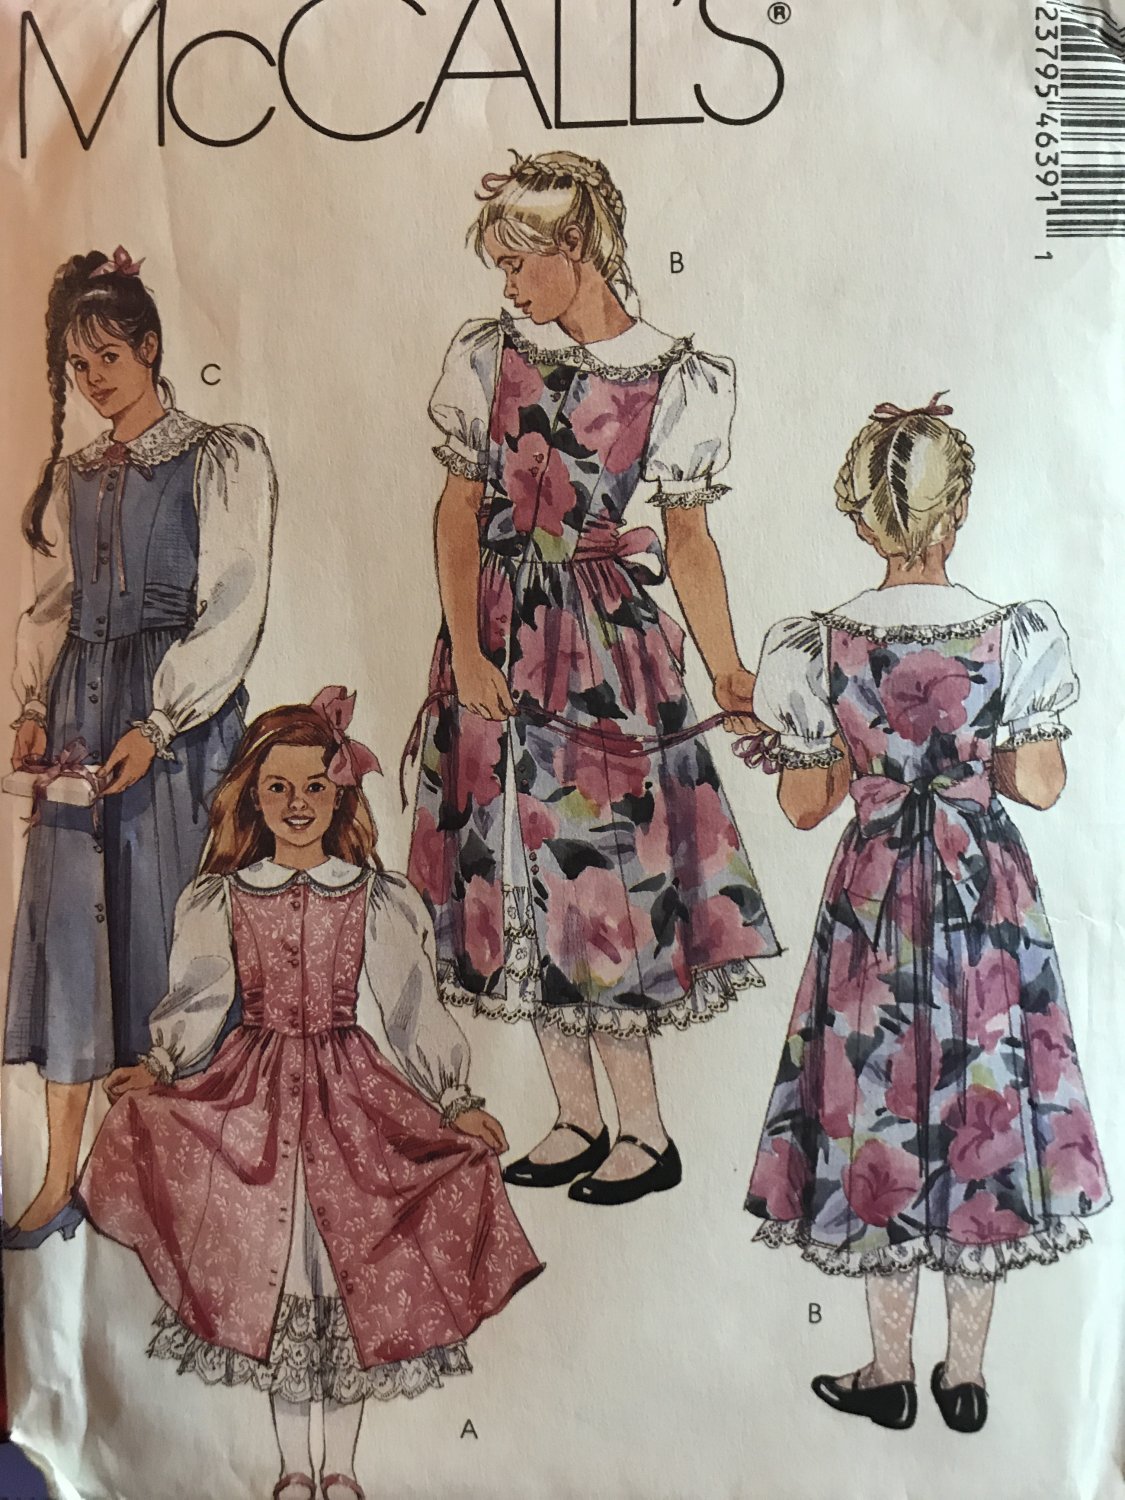 Simplicity 4639 Girls' Jumper Blouses and Petticoat sewing pattern size 7